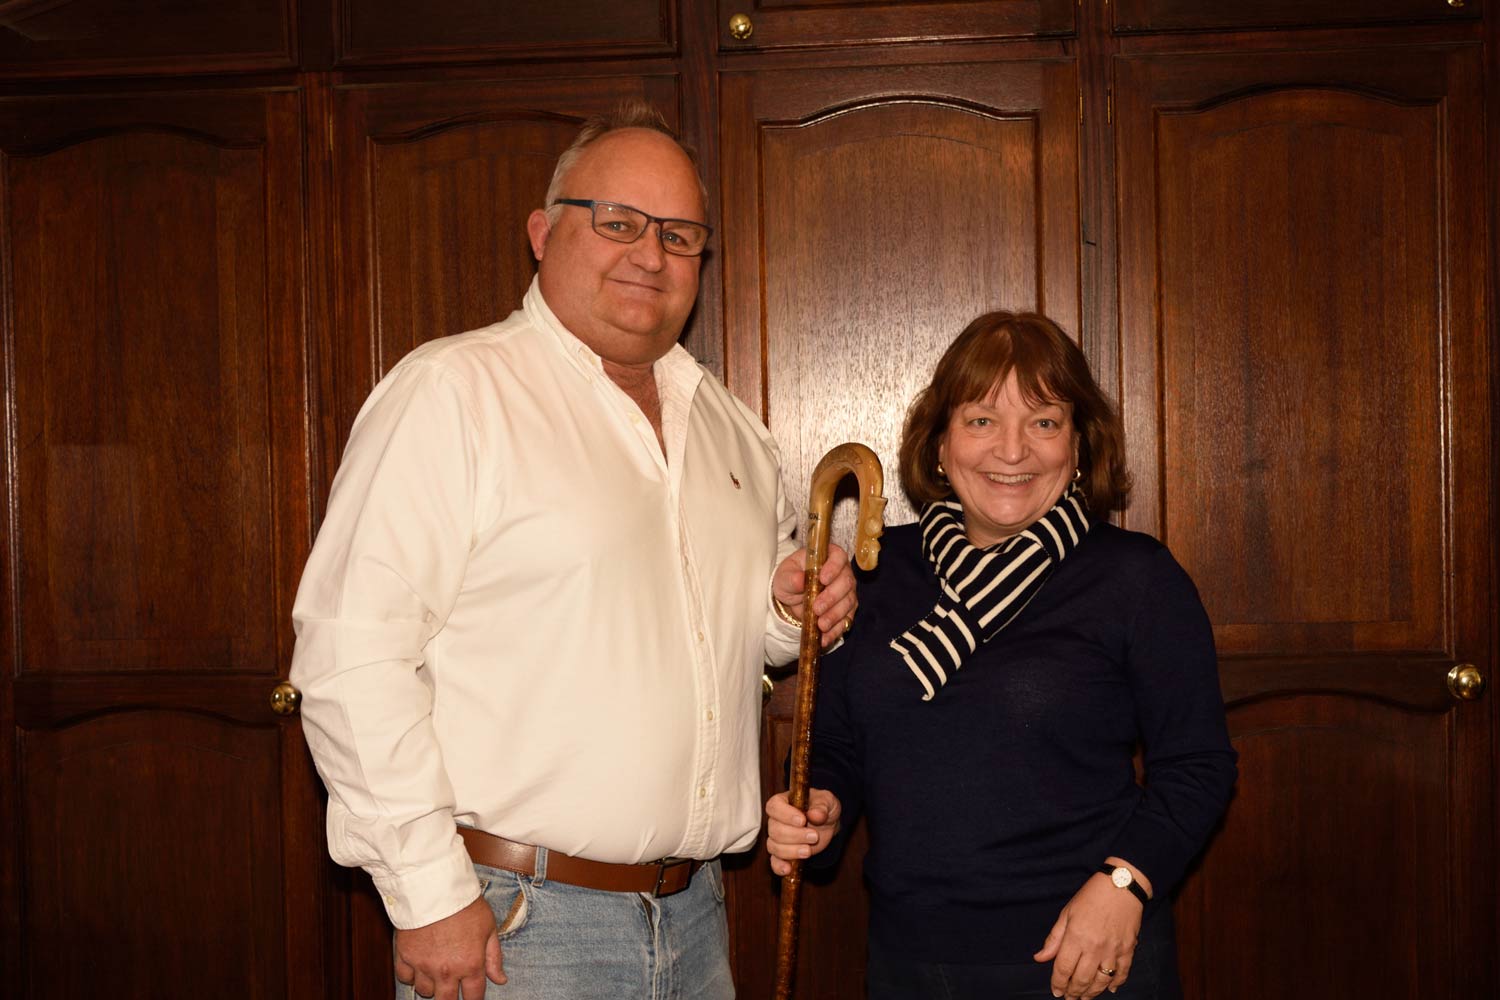 Richard Search takes the ceremonial crook from outgoing Tockwith Show president Sarah Burckhardt